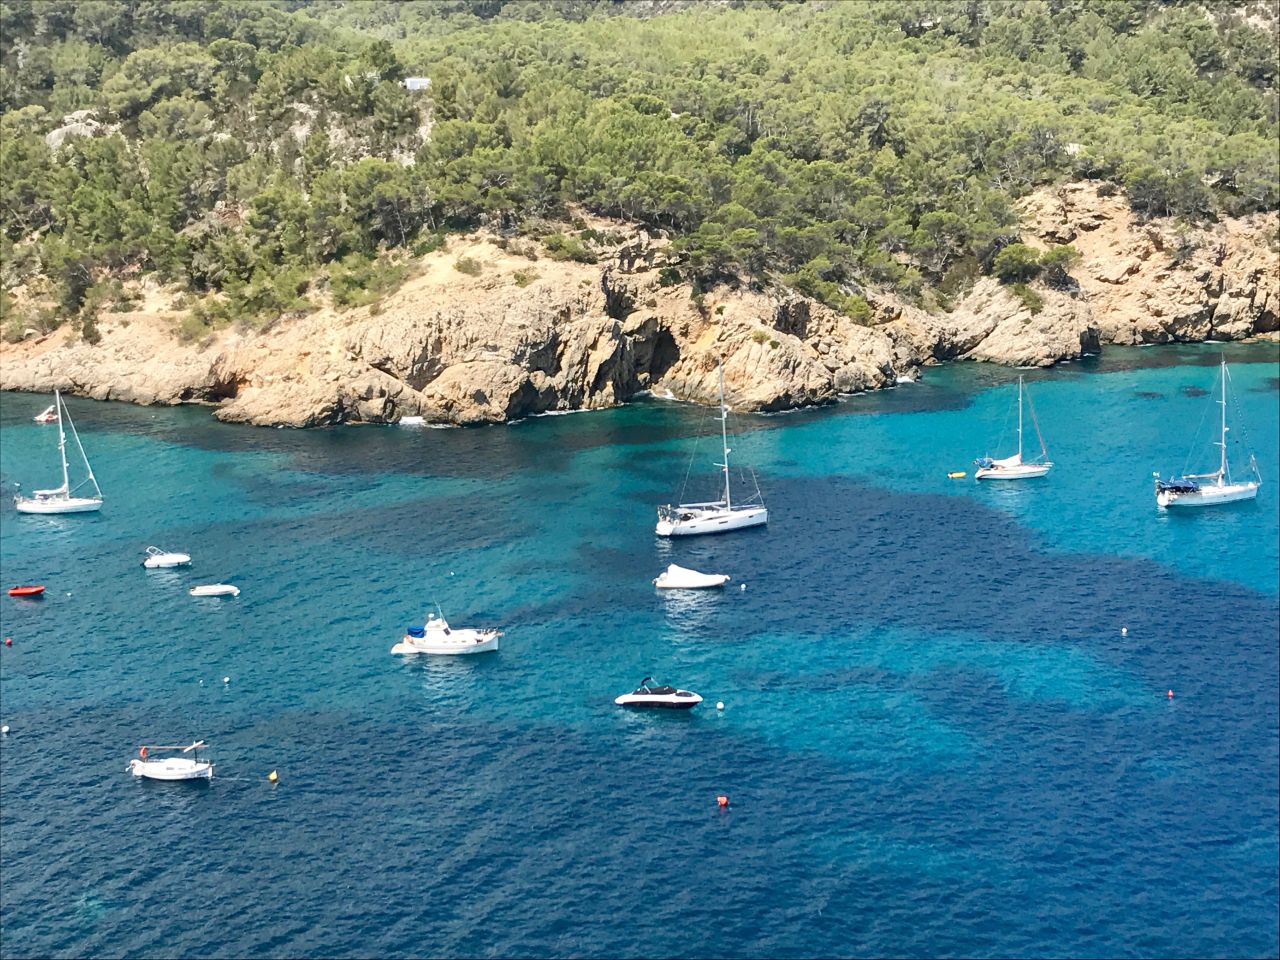 "Boomerang" is pictured anchored in the middle of Cala San Miguel in Ibiza, the kind of idyllic setting they envisaged when they bought the boat.